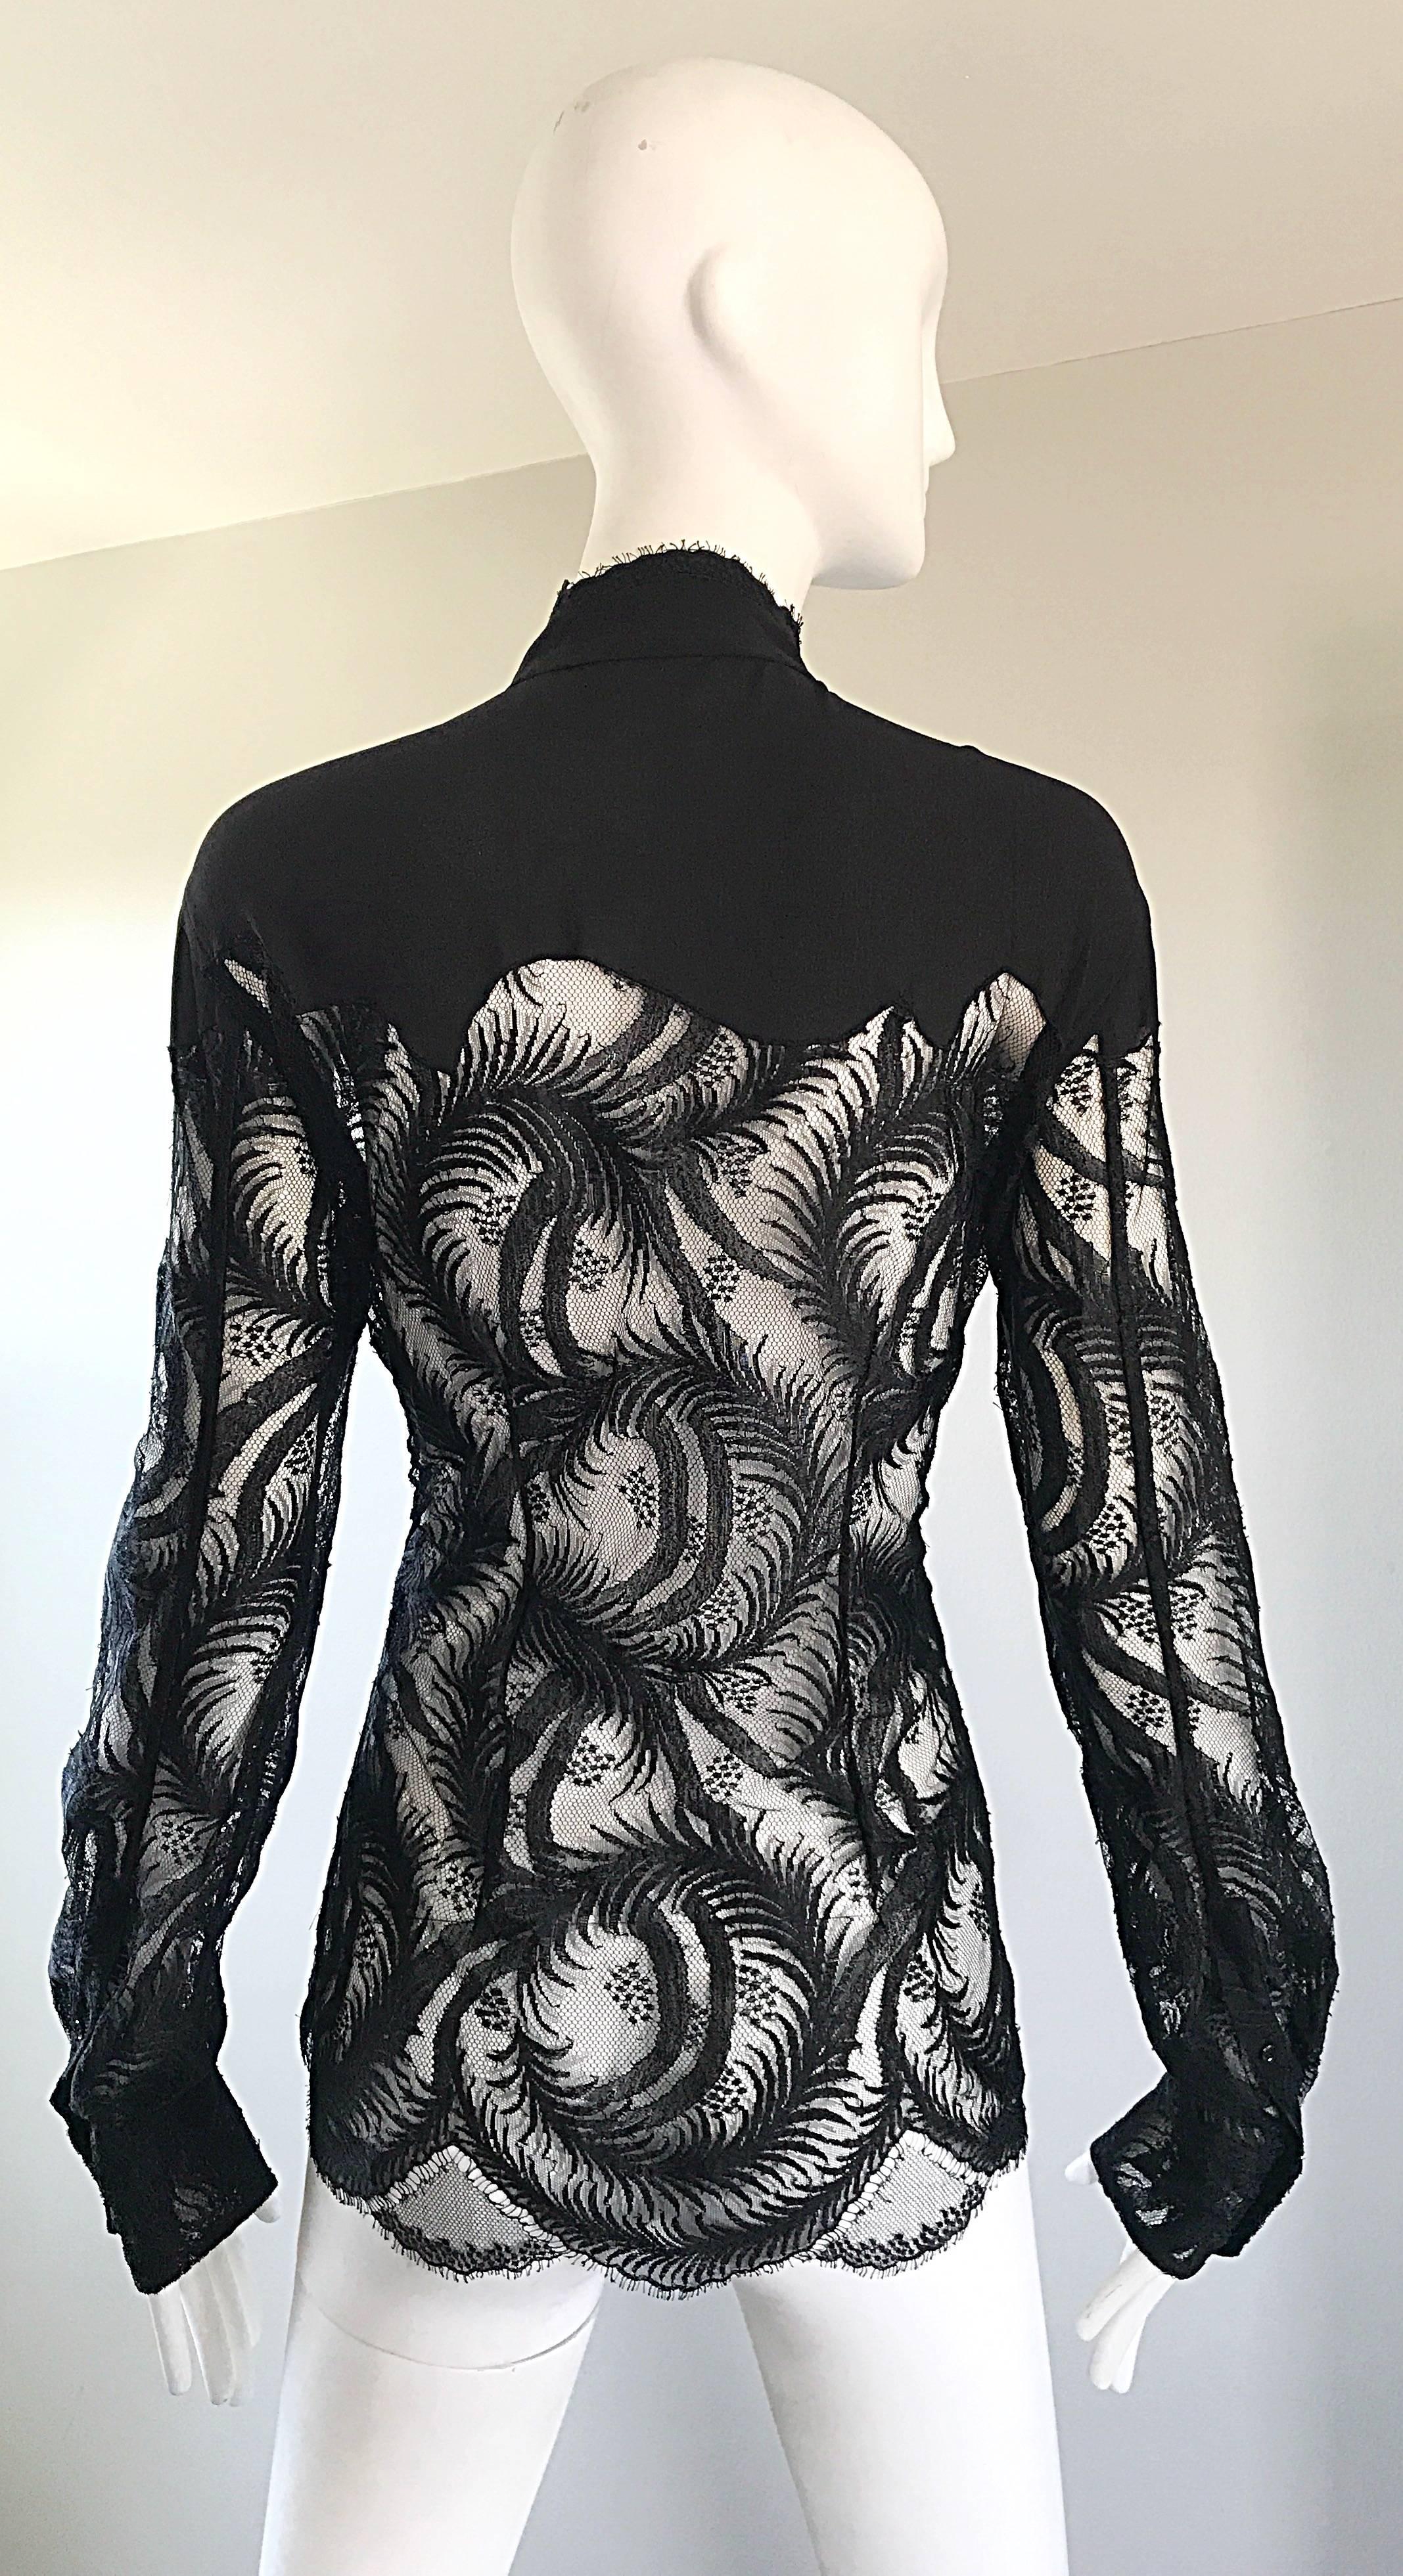 Women's Tom Ford for Yves Saint Laurent Black Chantilly French Lace Semi Sheer Blouse